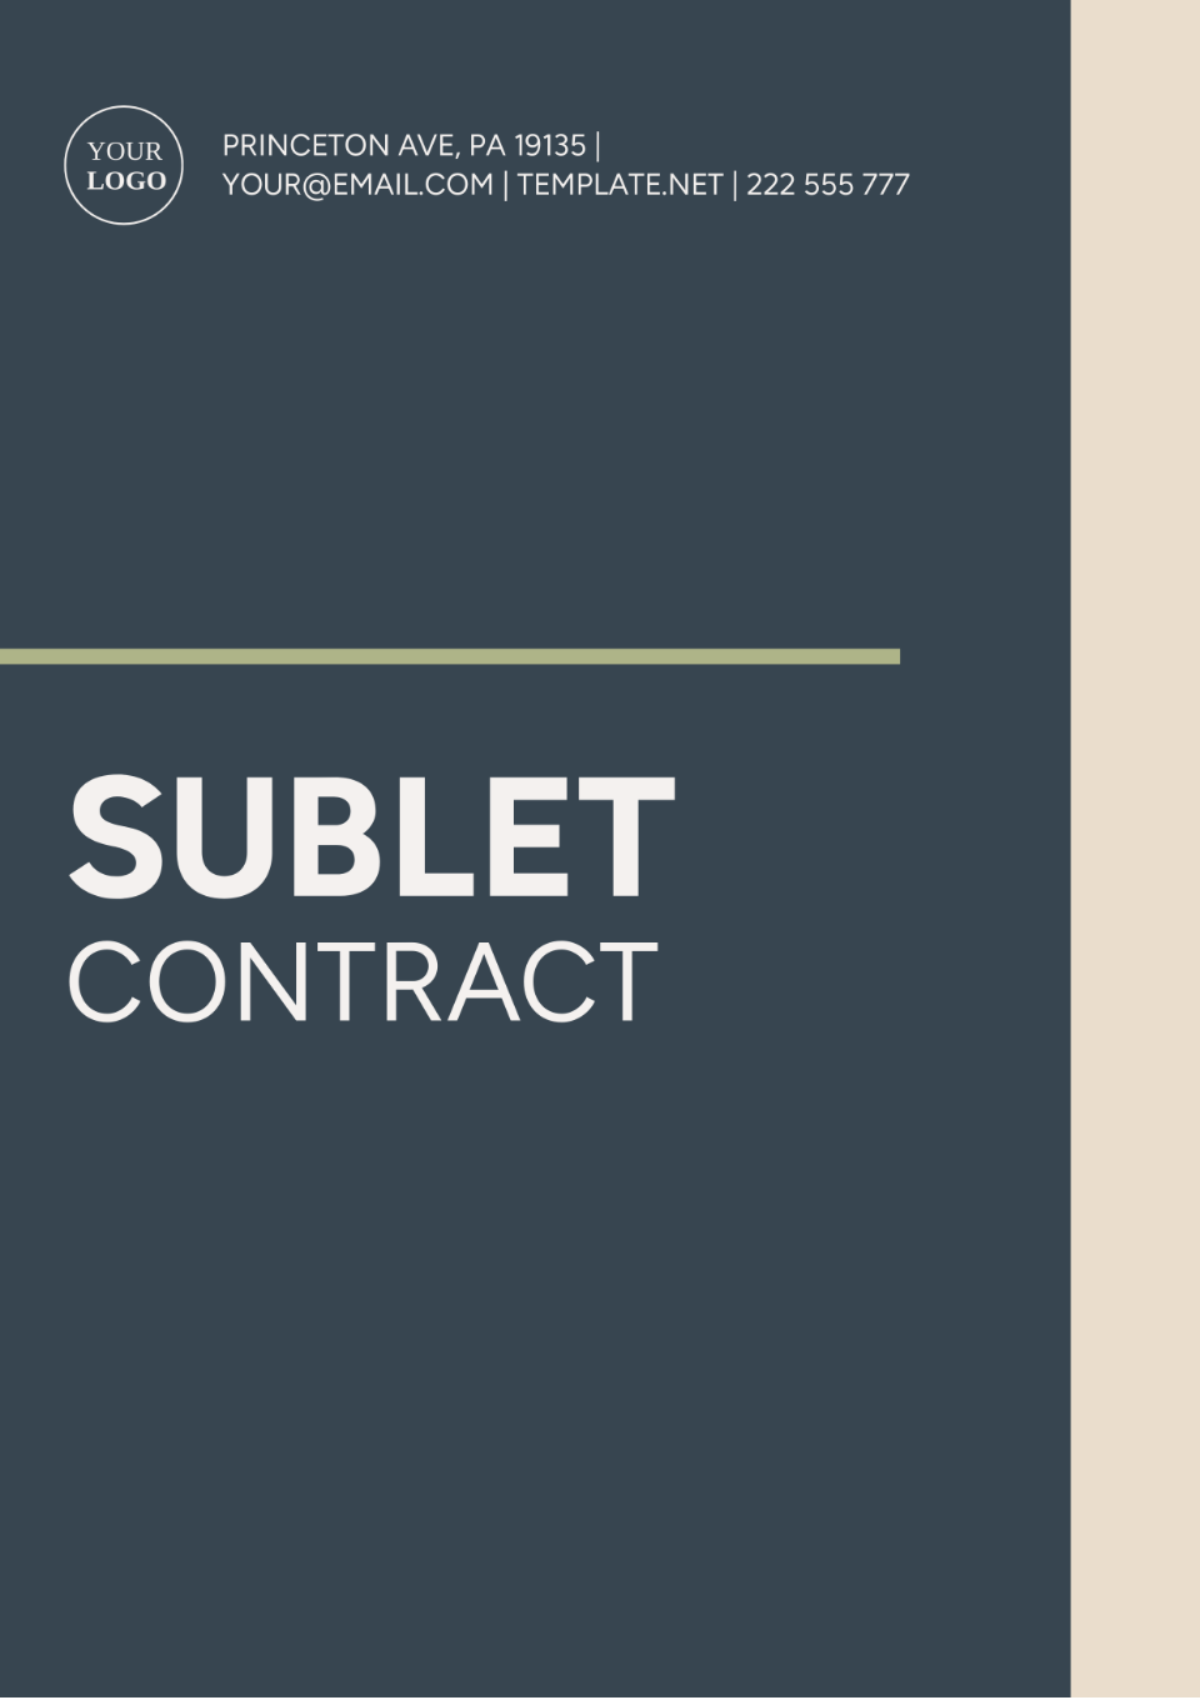 Sublet Contract Template